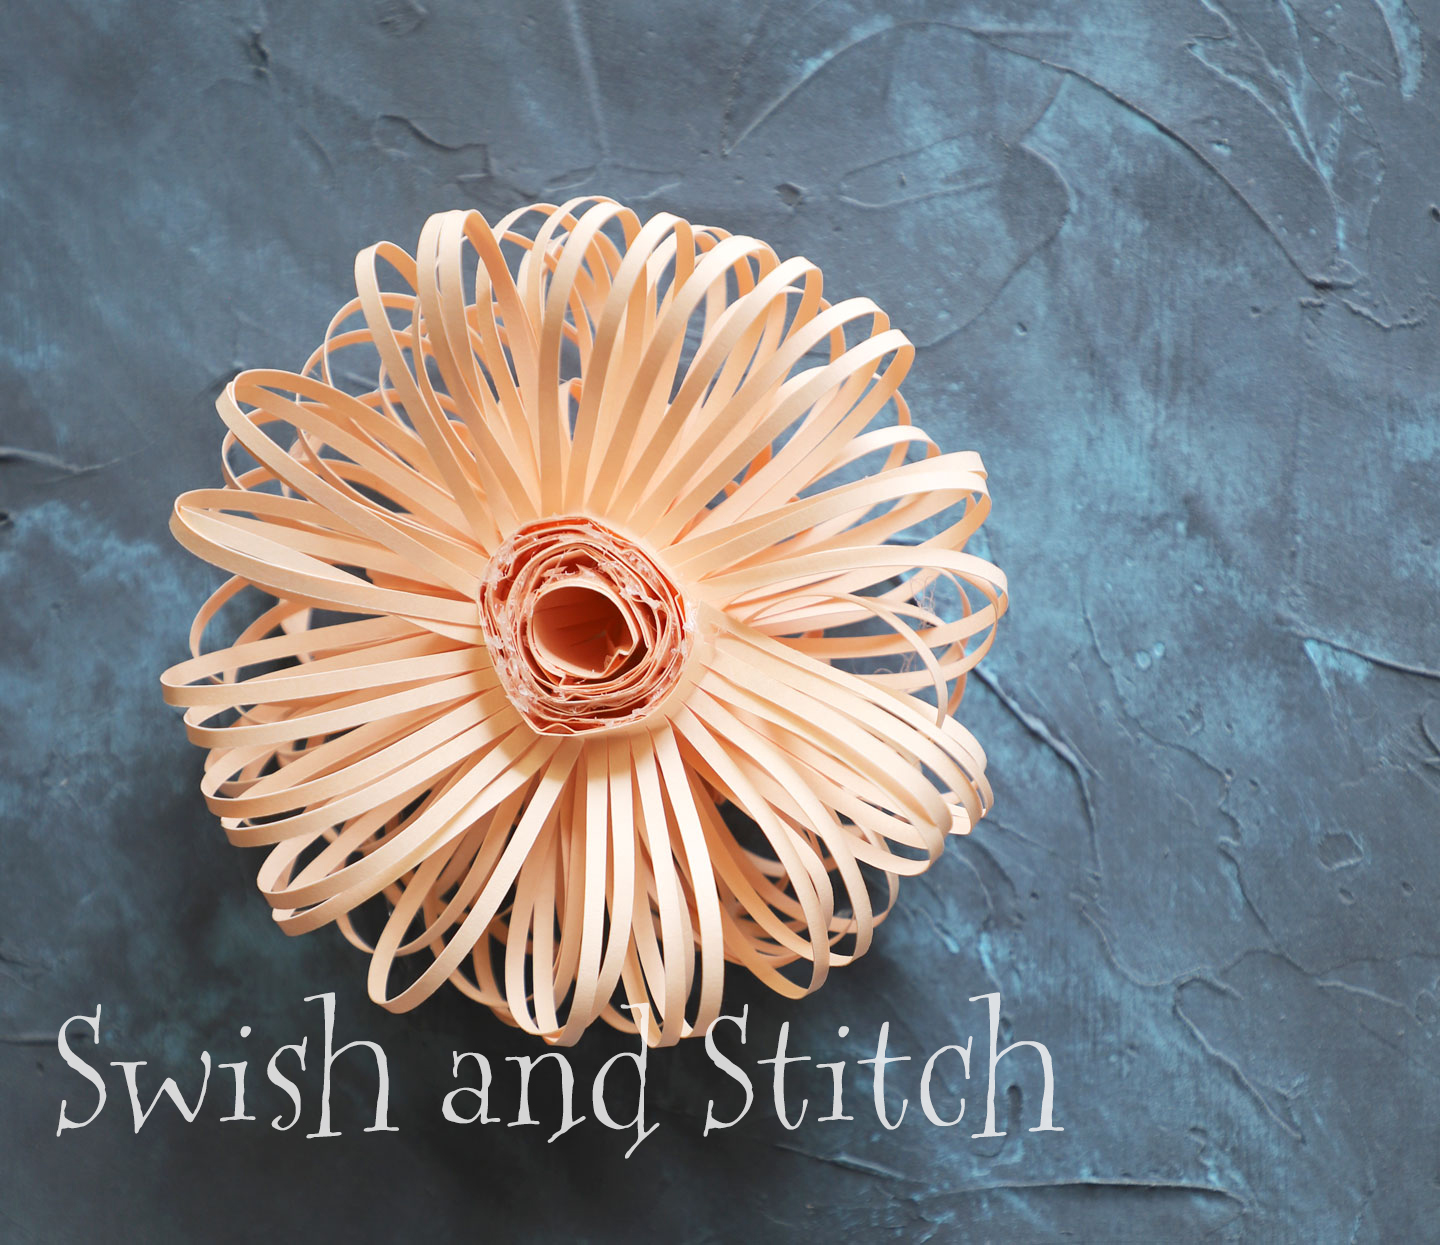 Diy Jumbo Paper Flowers With Cut Files Daisy Swish And Stitch